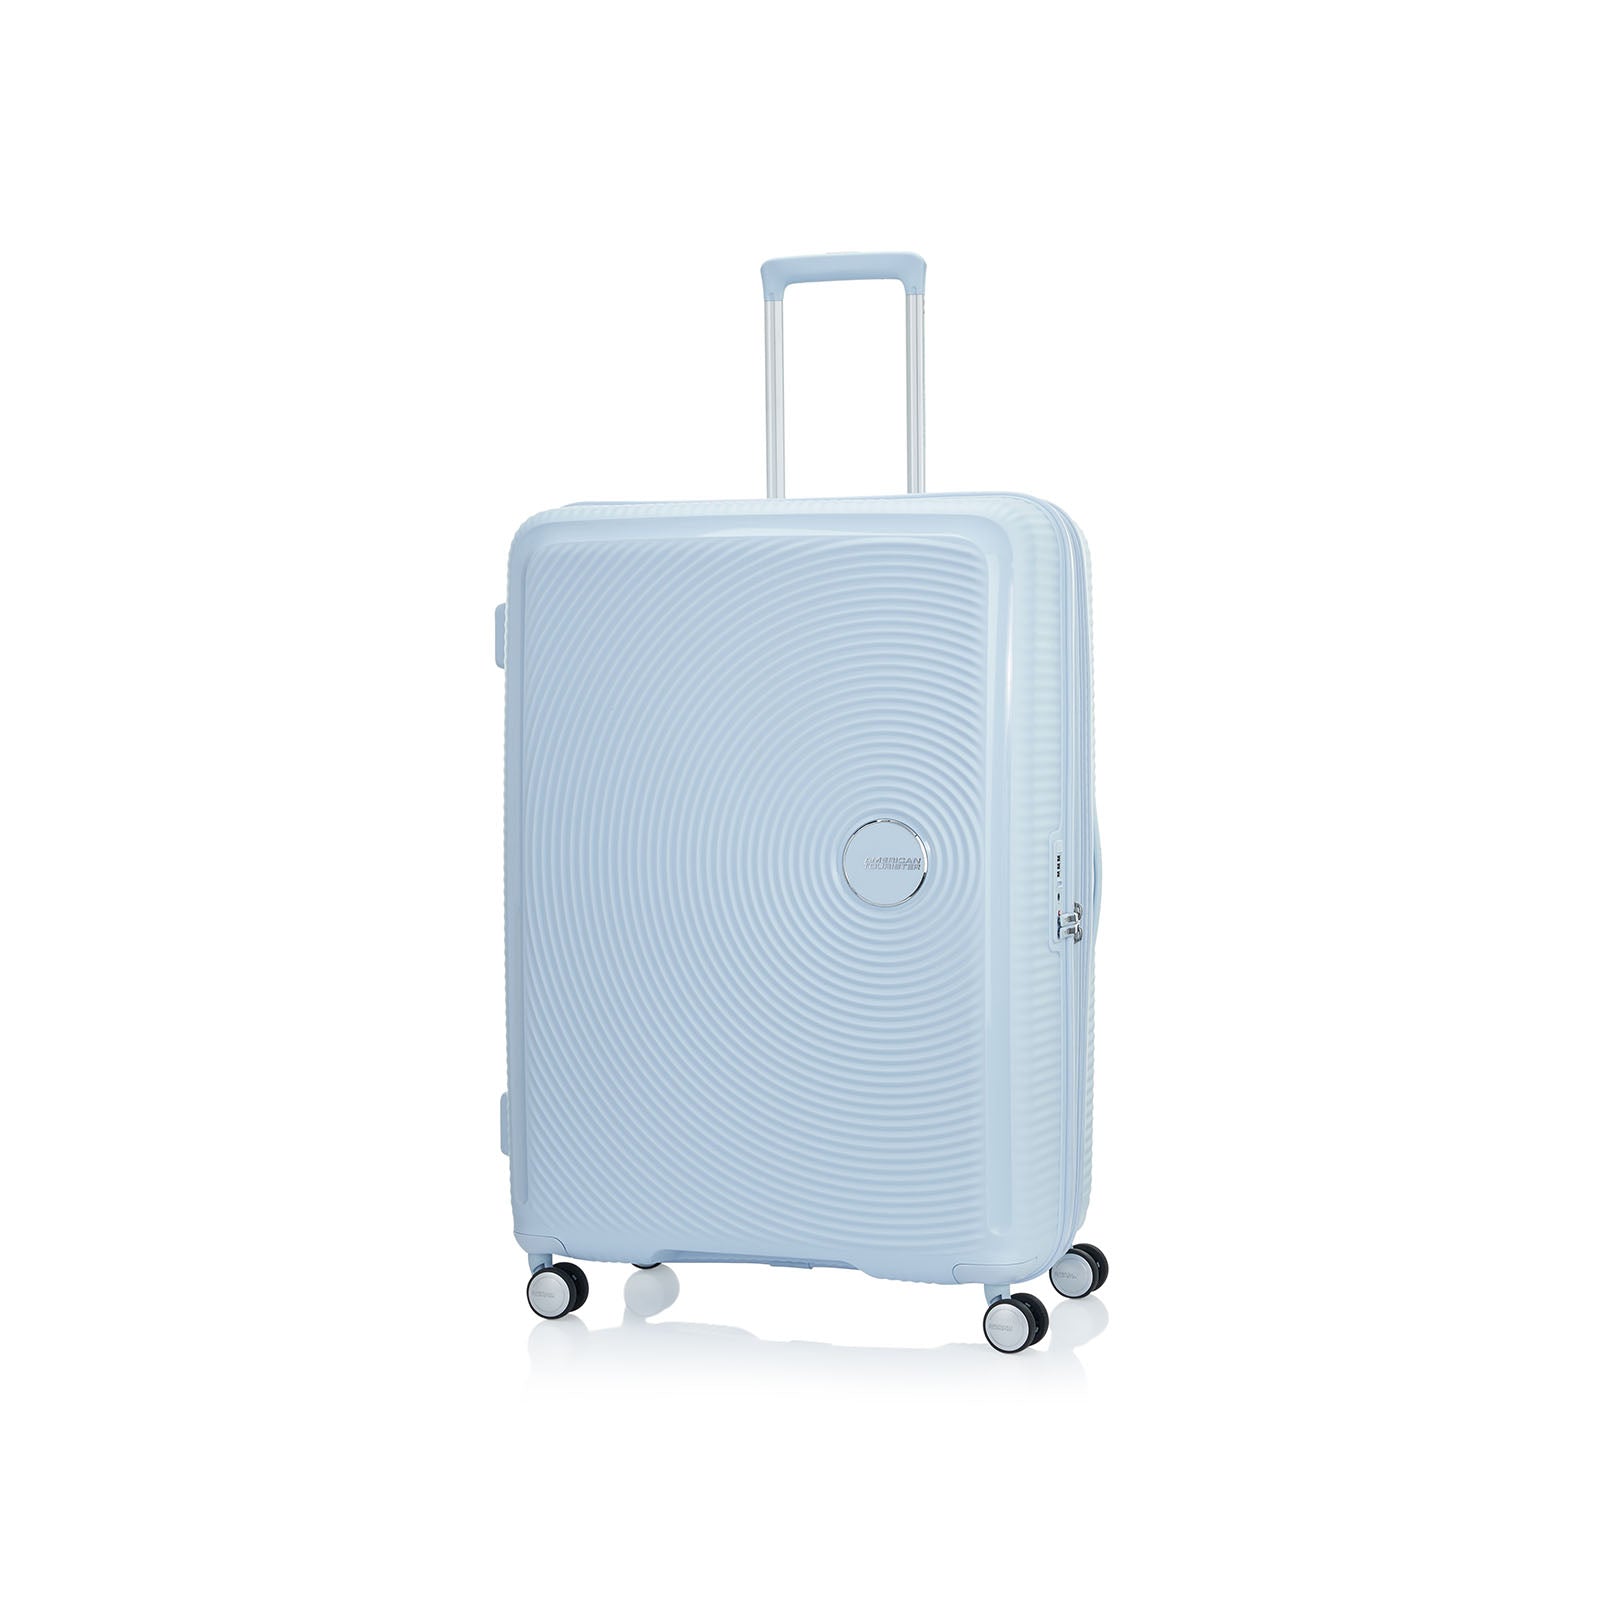 American-Tourister-Curio-2-80cm-Suitcase-Powder-Blue-Front-Angle